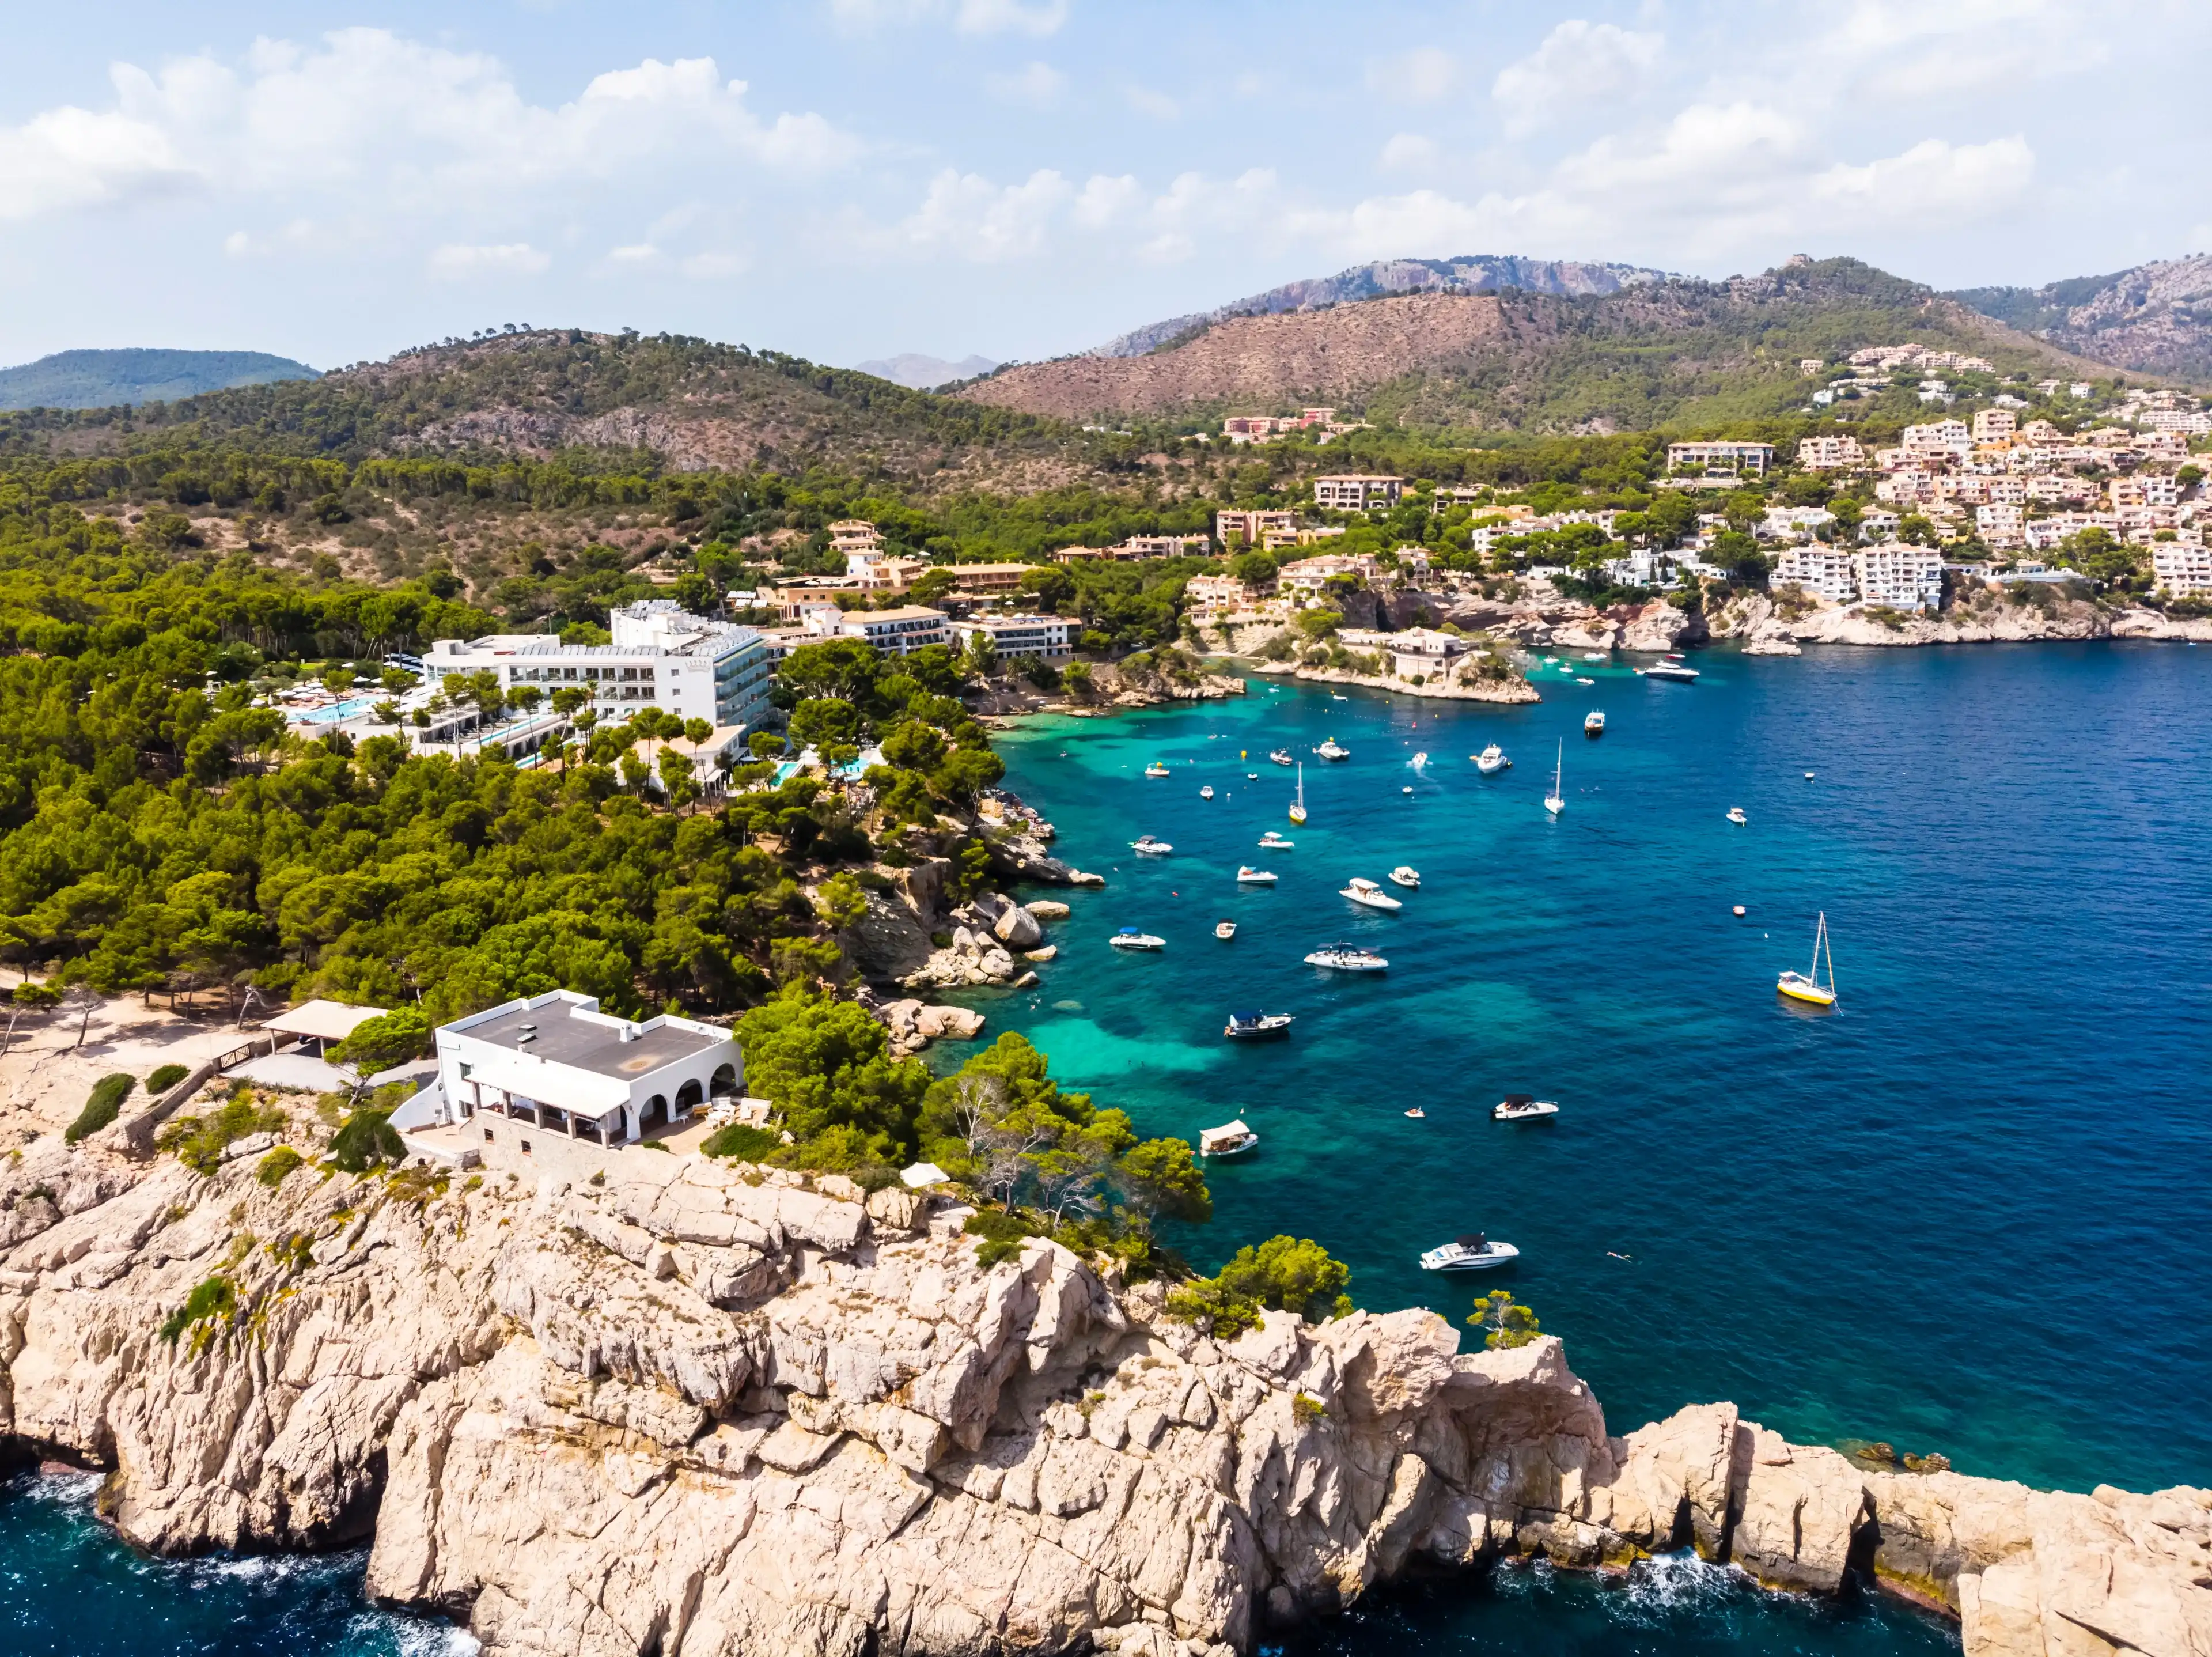 Aerial view, natural harbor and coast of Cala Fornells, Paguera region, Balearic Islands, Spain